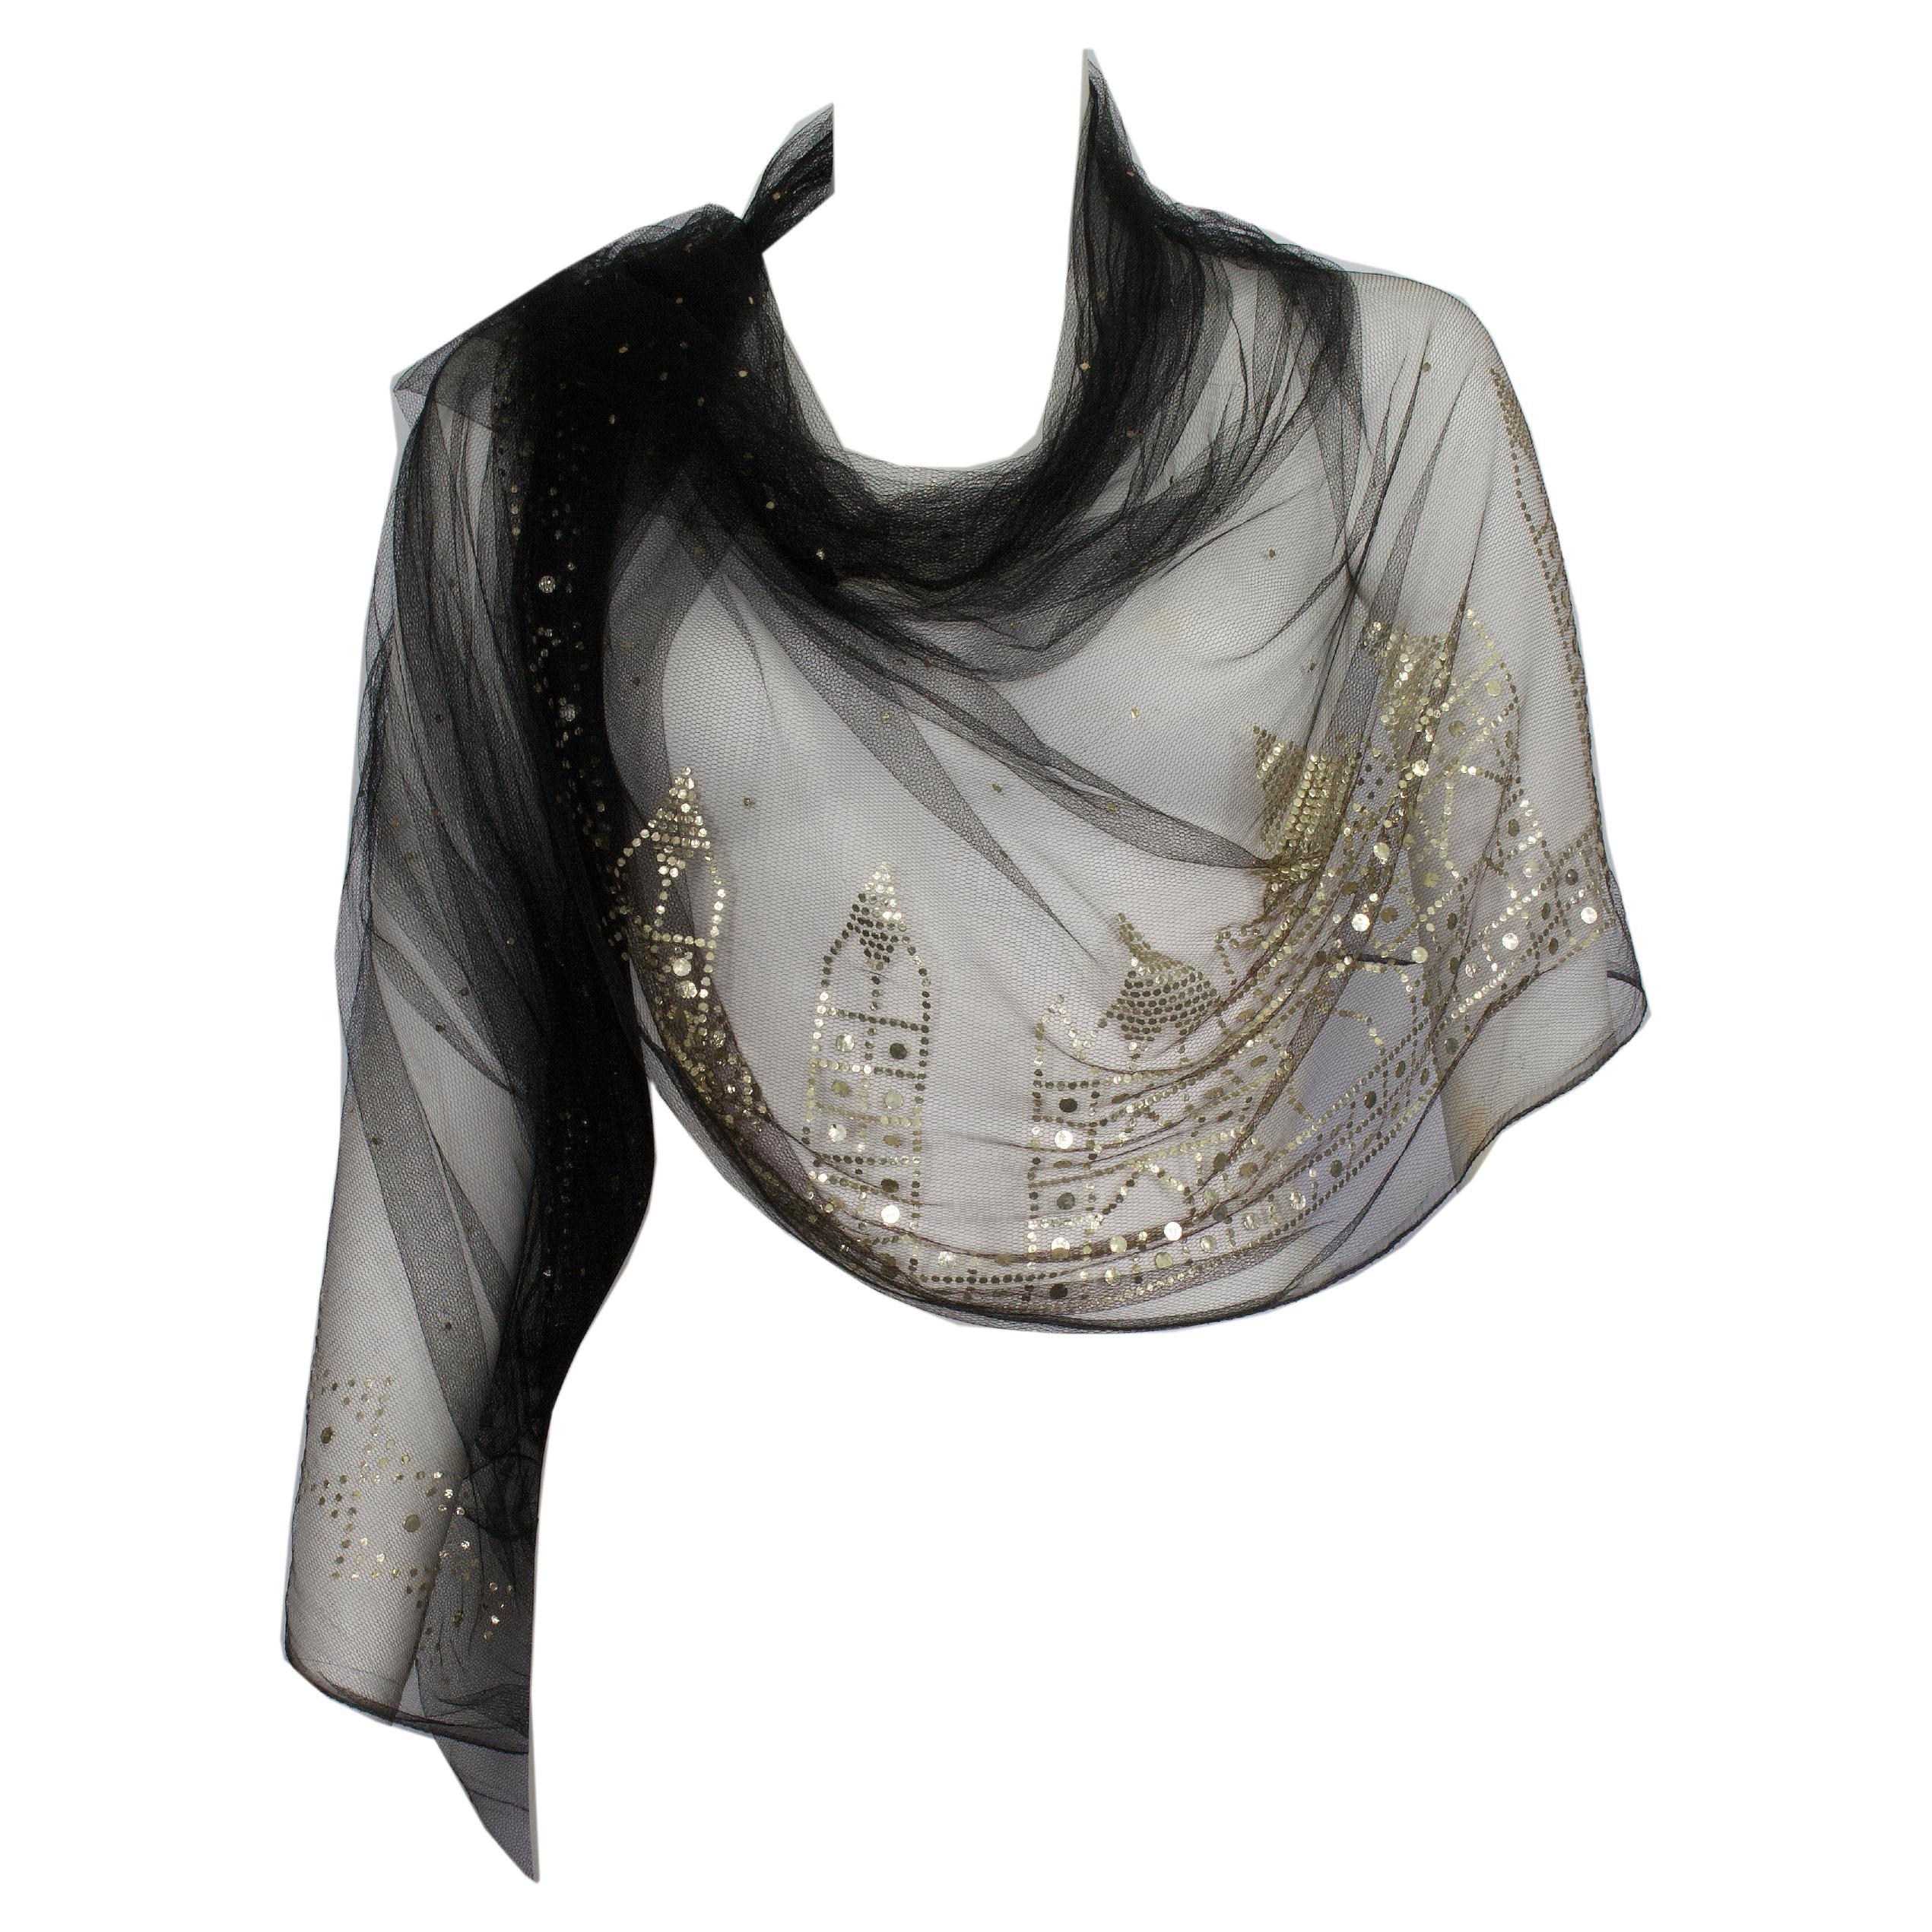 Sold at Auction: Louis Vuitton New Metallic Silver Scarf So